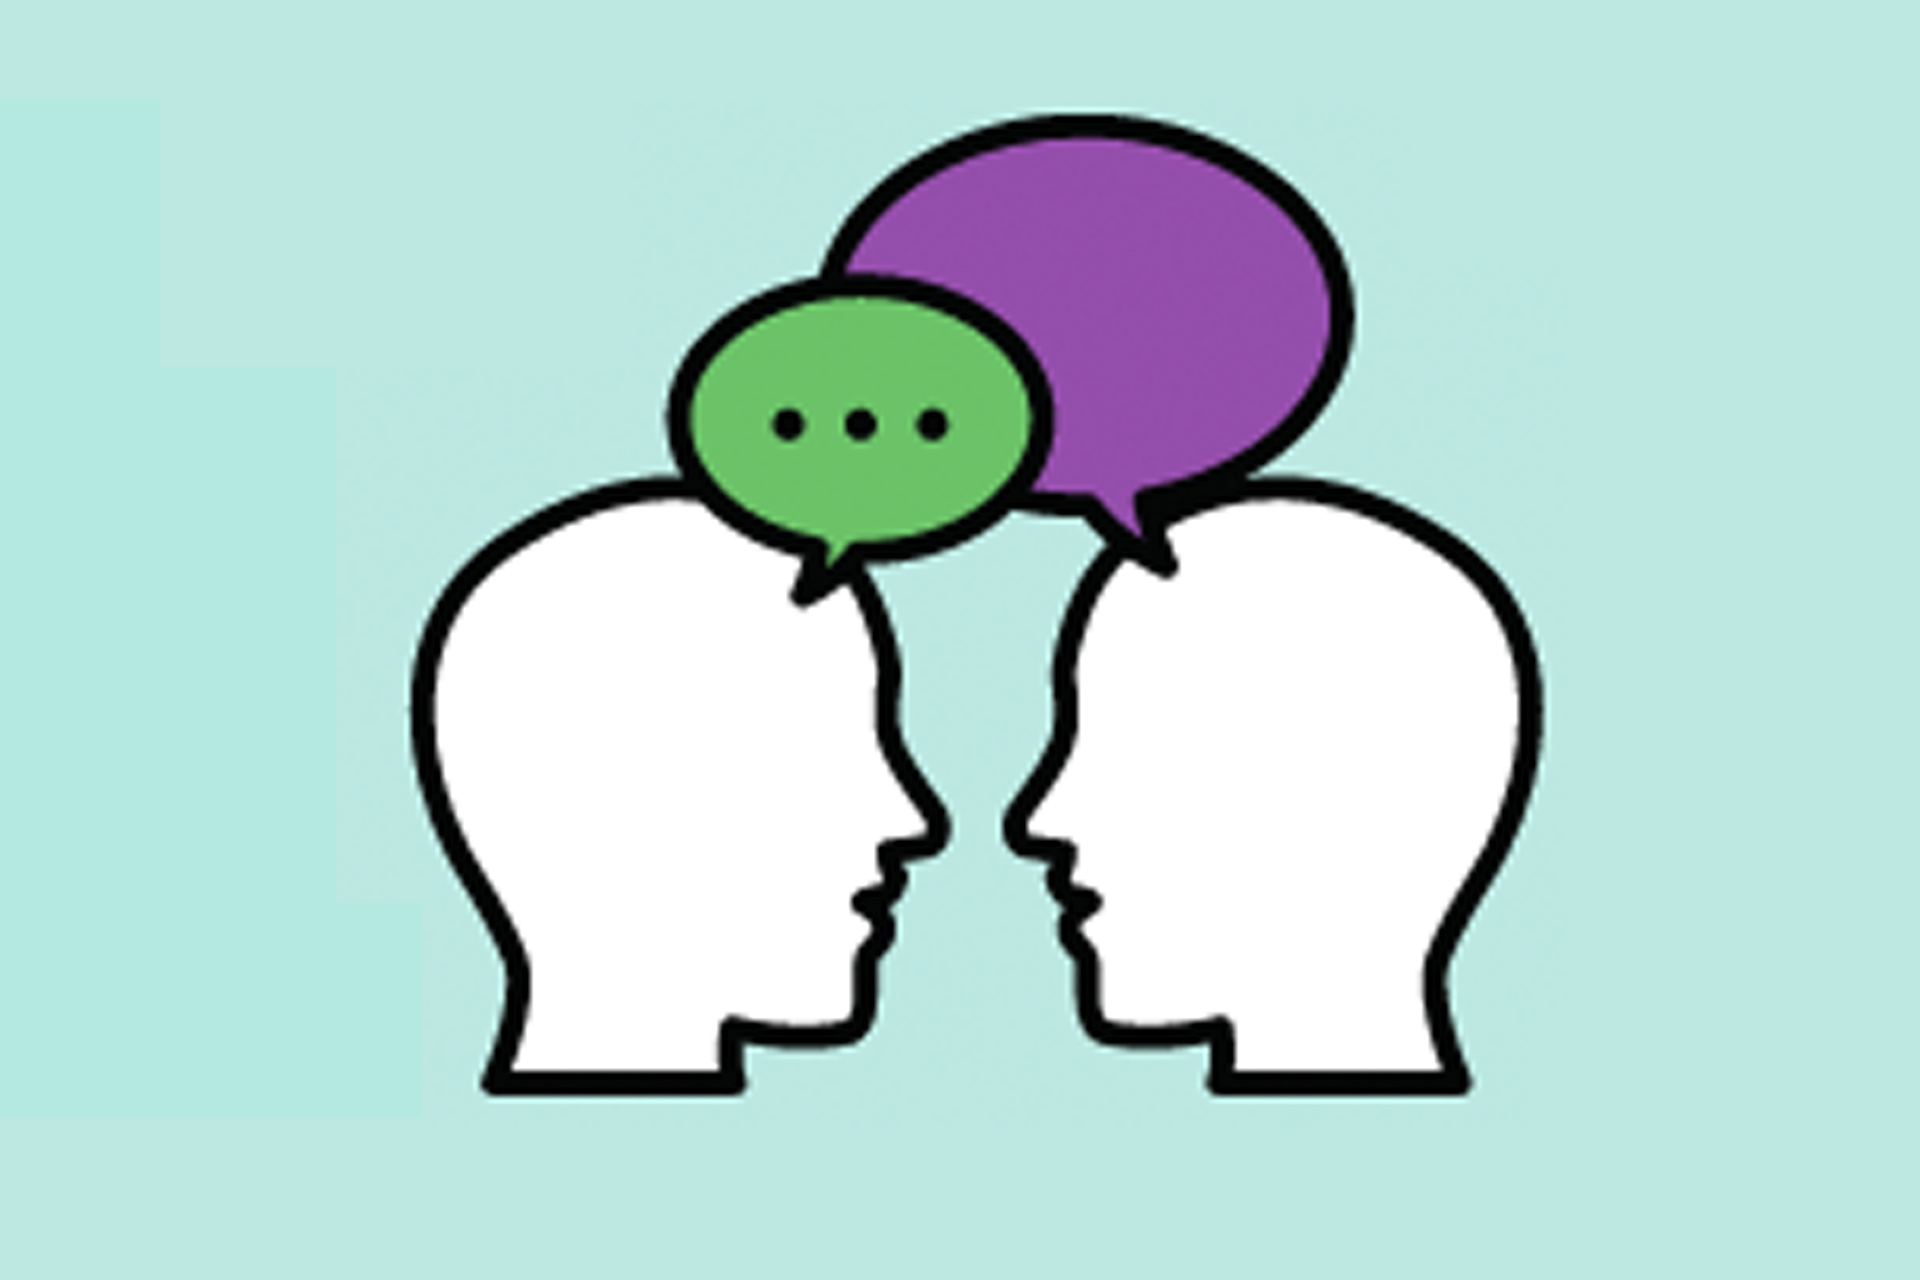 Illustration of two people conversing